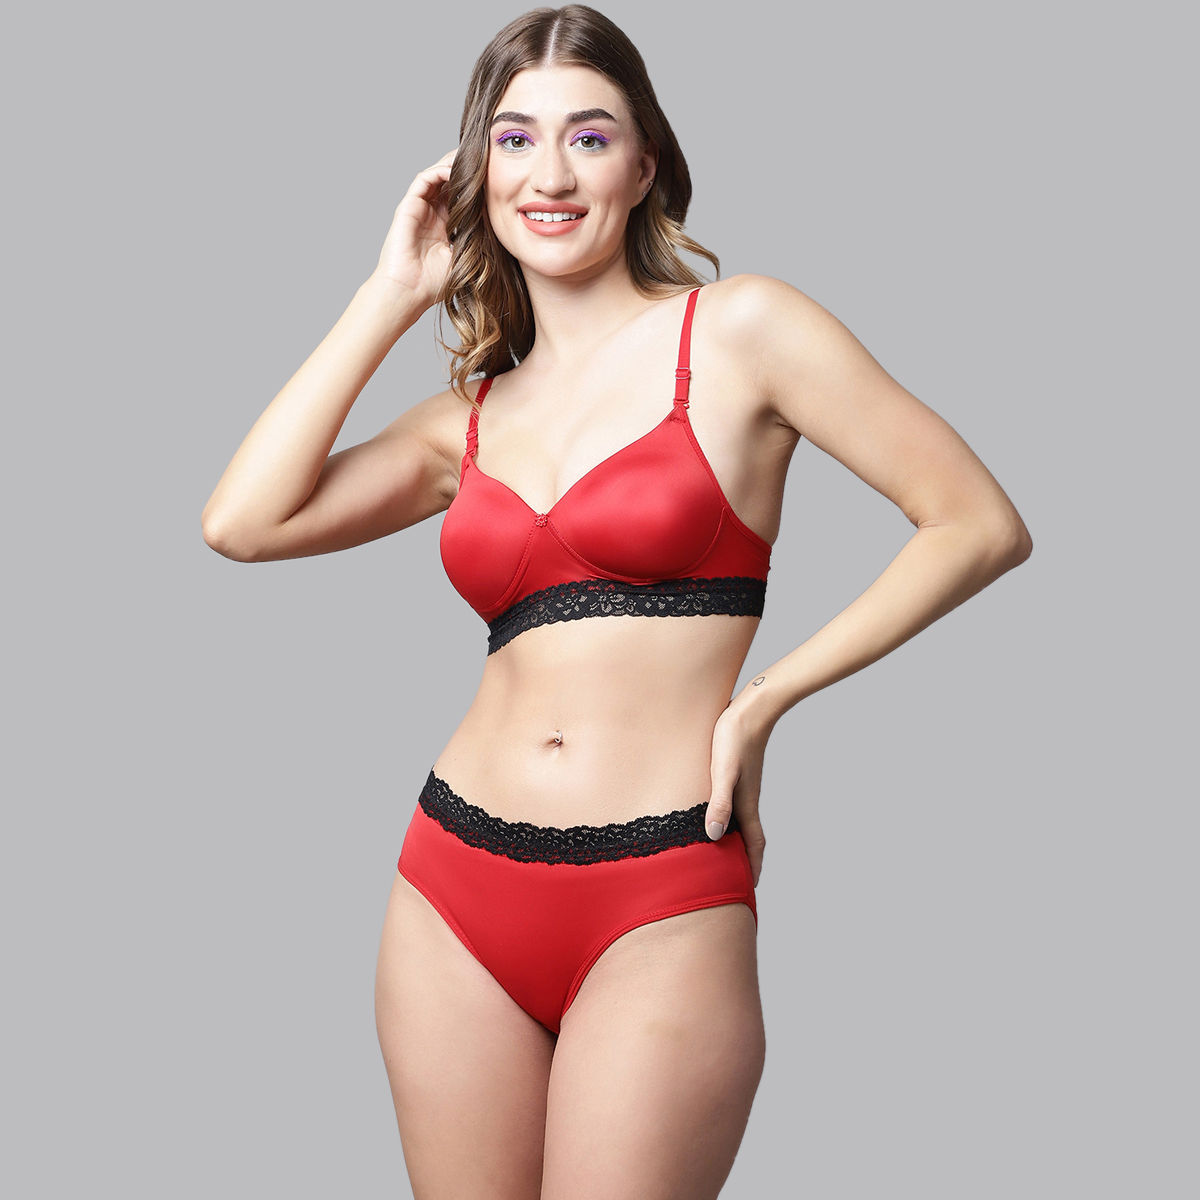 https://images-static.nykaa.com/media/catalog/product/3/d/3d9ca5fPC-SET-6095-RED_1.jpg